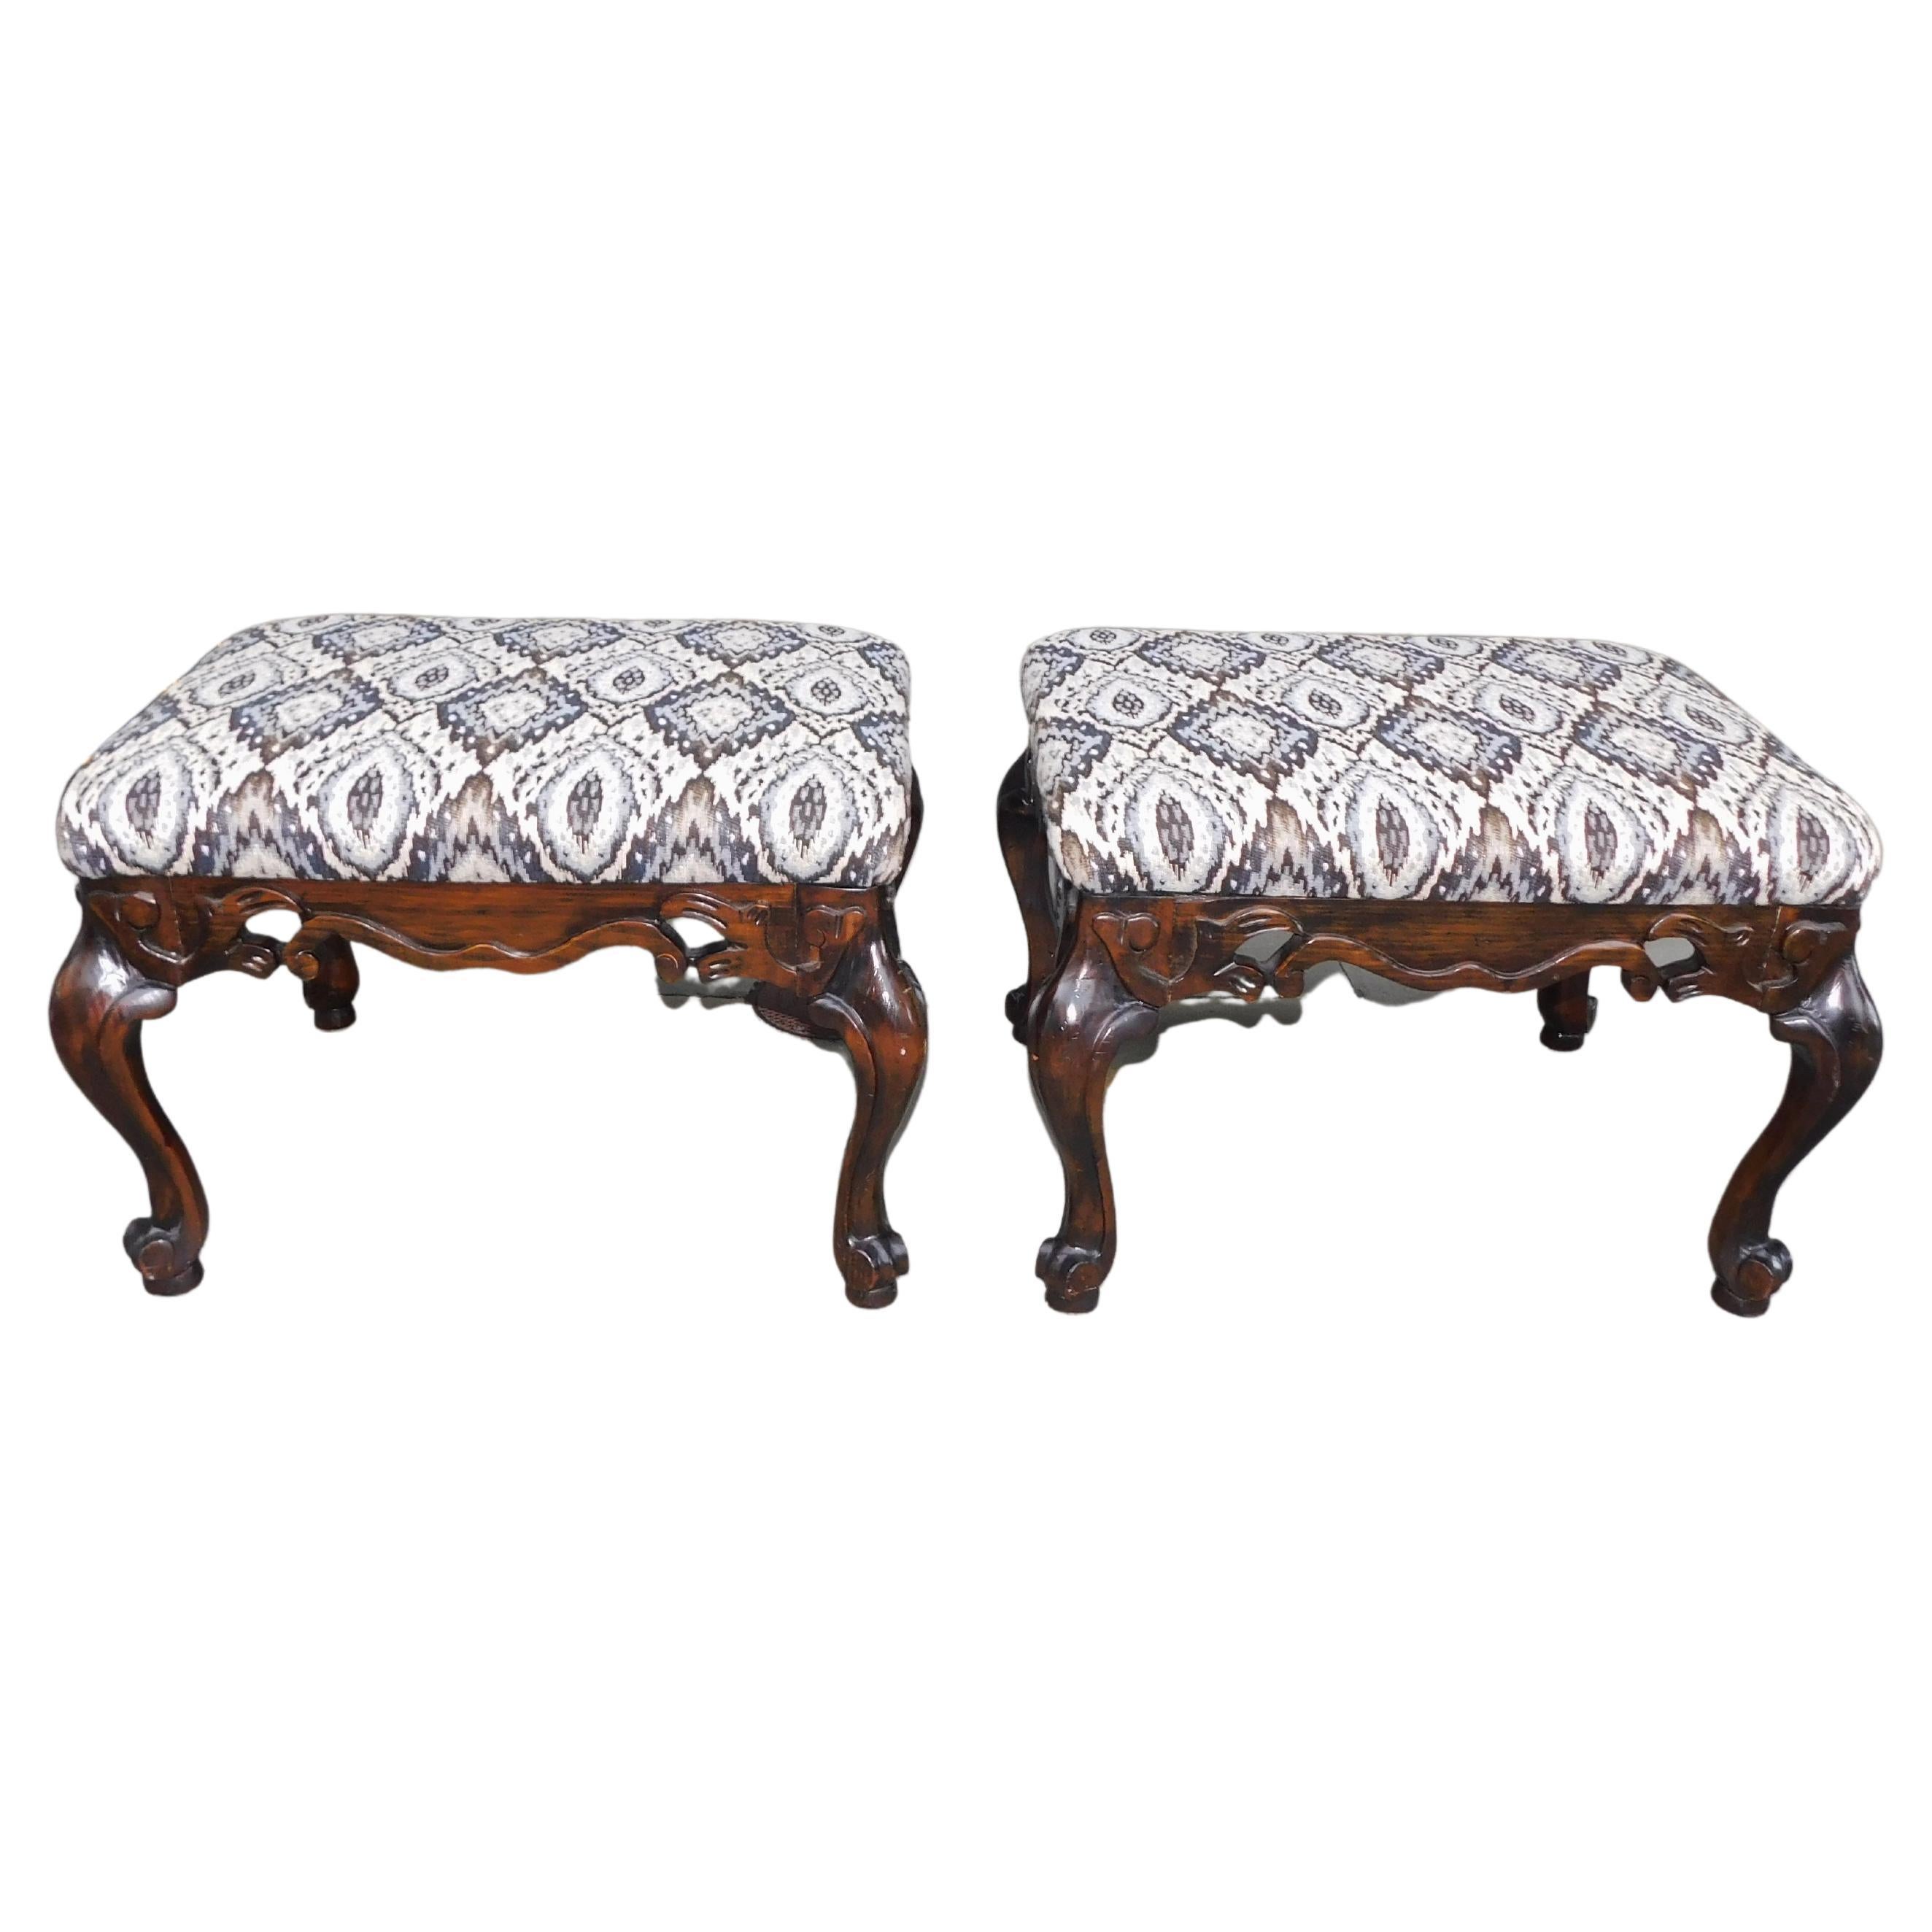 Pair of Italian Baroque Style Upholstered Benches with Cabriole Legs C. 1880 For Sale